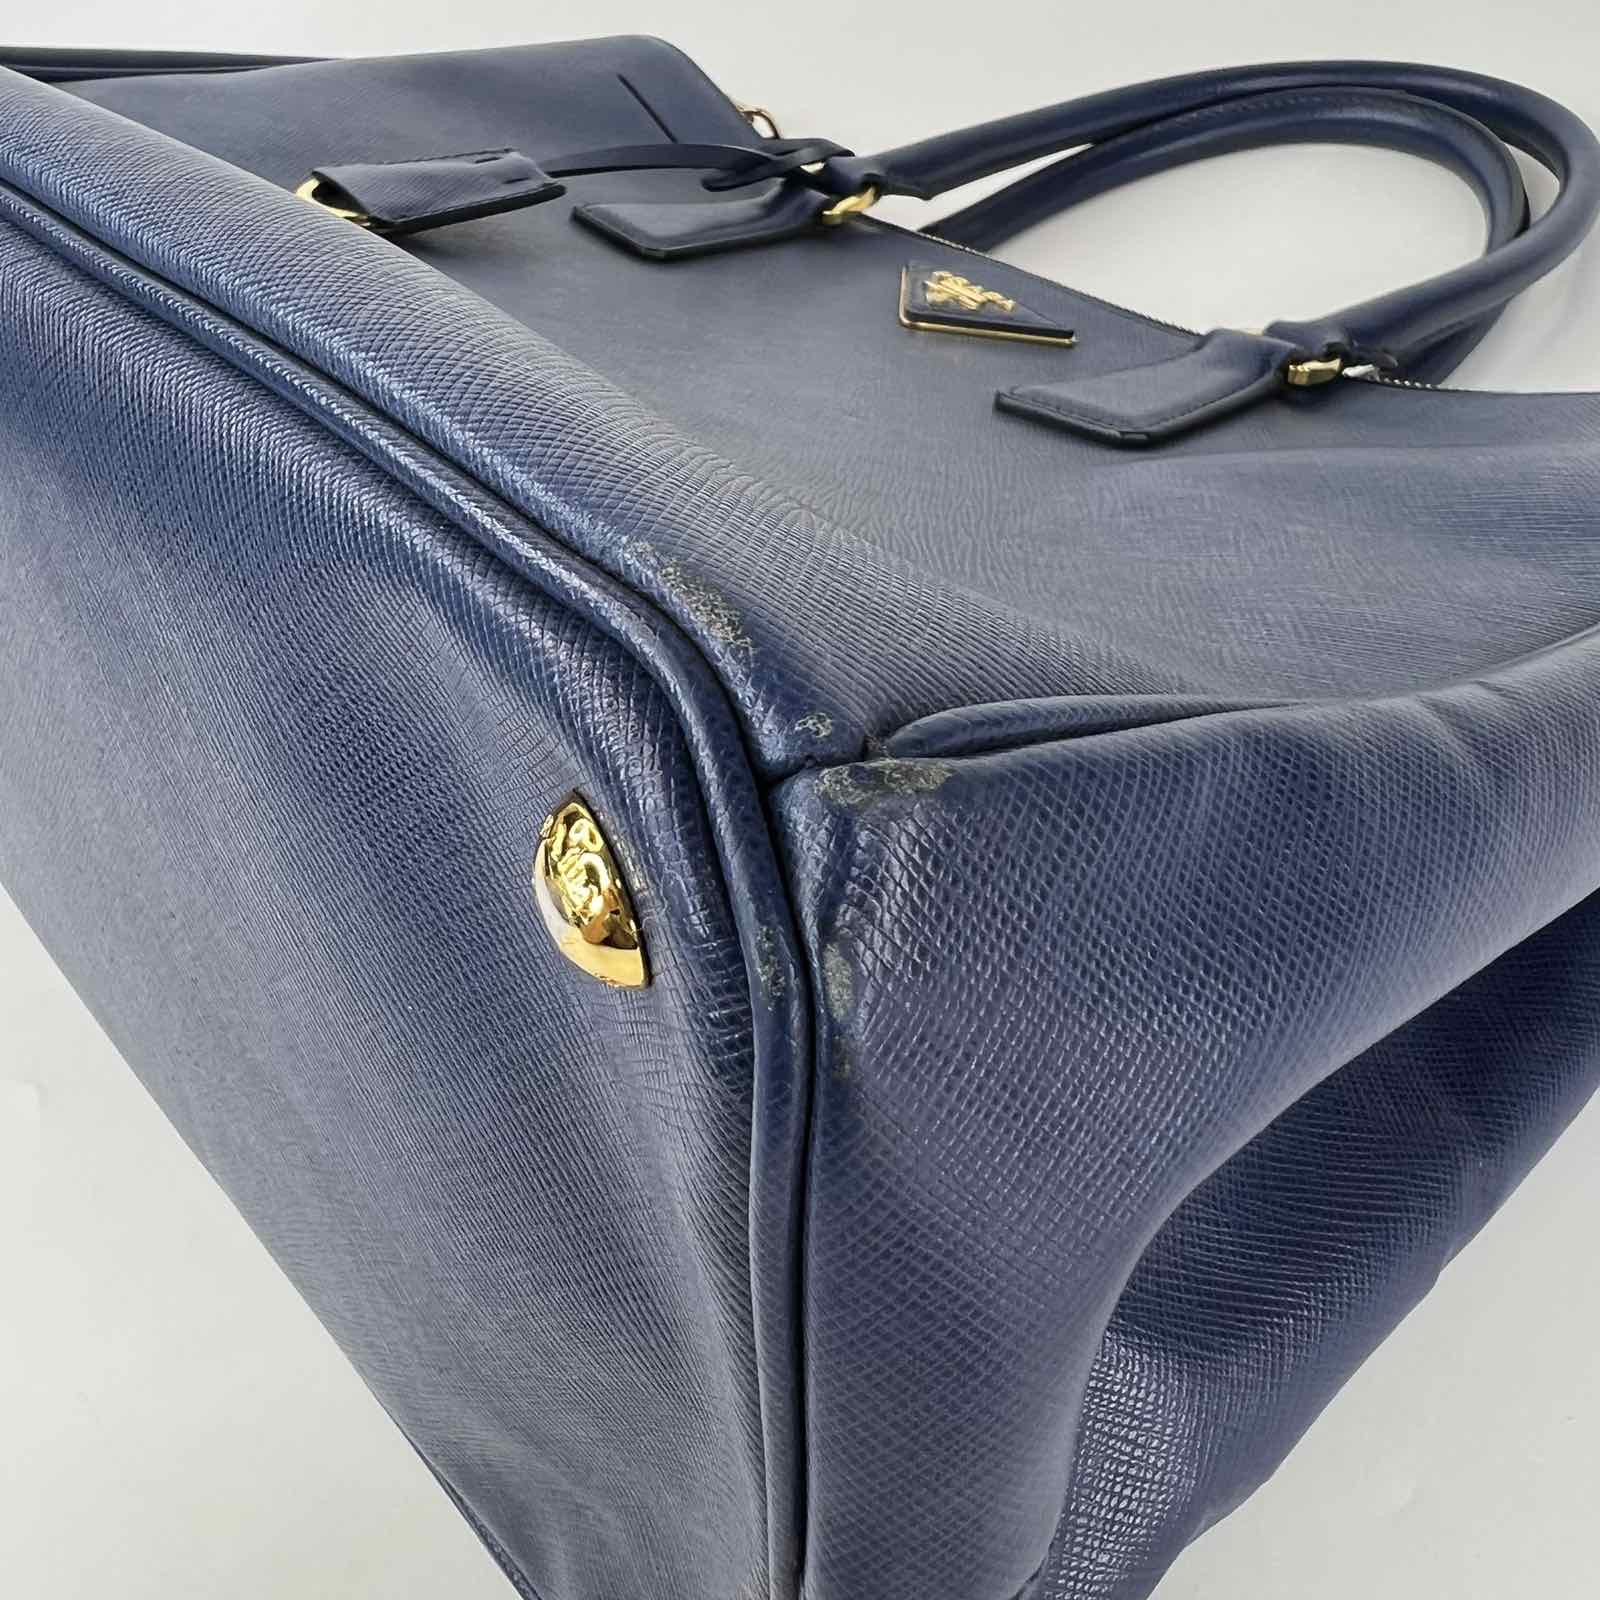 Saffiano Lux Double Zip Tote Large blue navy ghw – L'UXE LINK